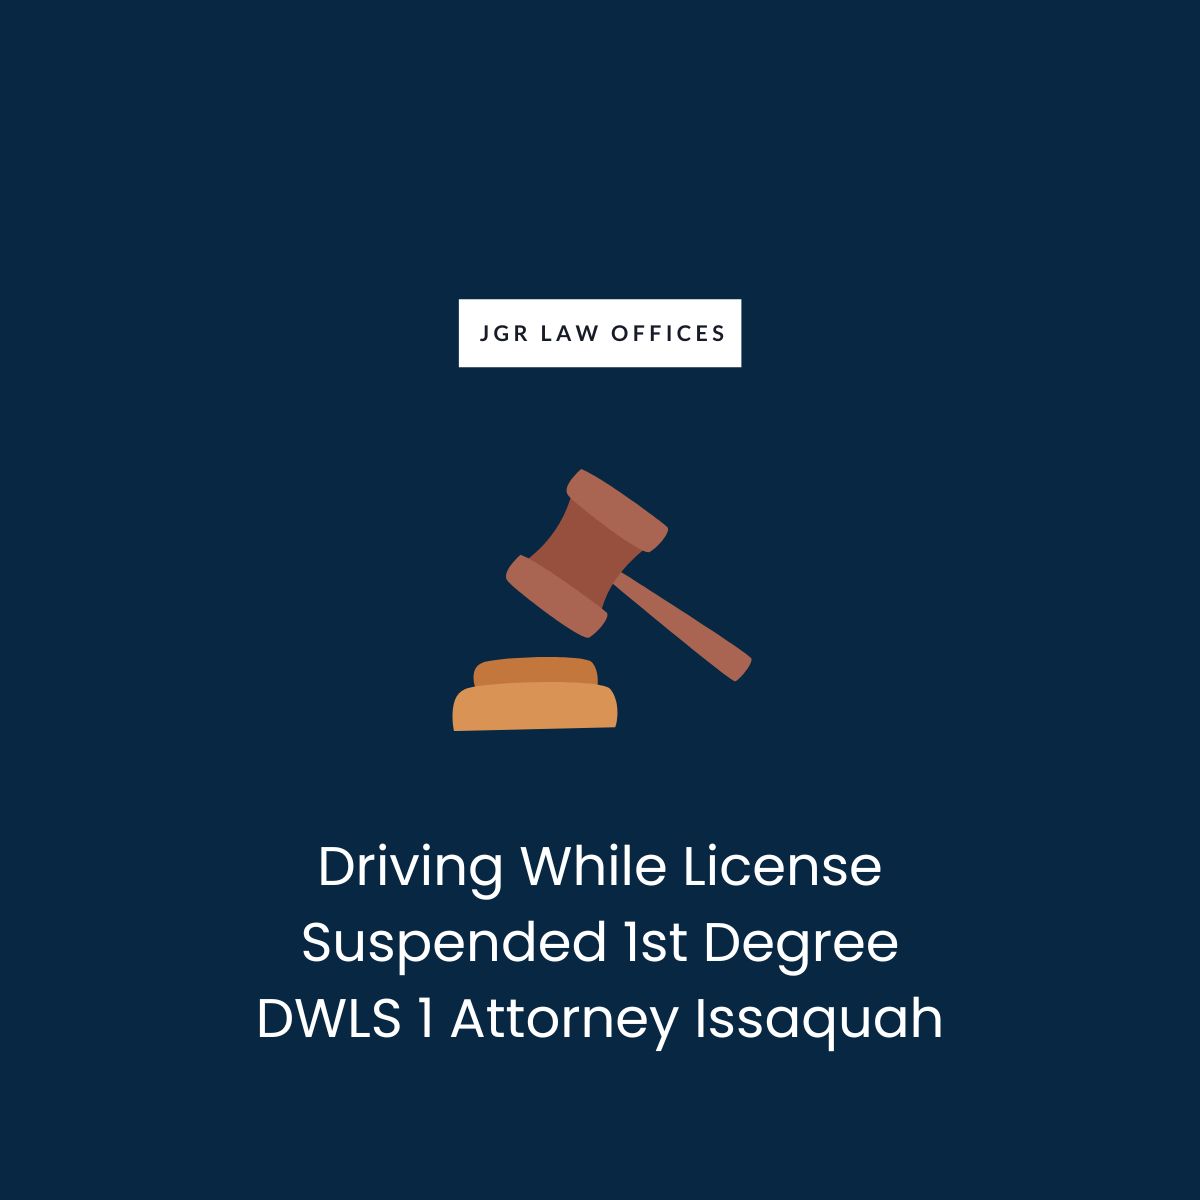 Driving While License Suspended 1st Degree DWLS 1 Attorney Issaquah Driving While License Suspended 1st Degree DWLS 1 Driving While License Suspended 1st Degree DWLS 1